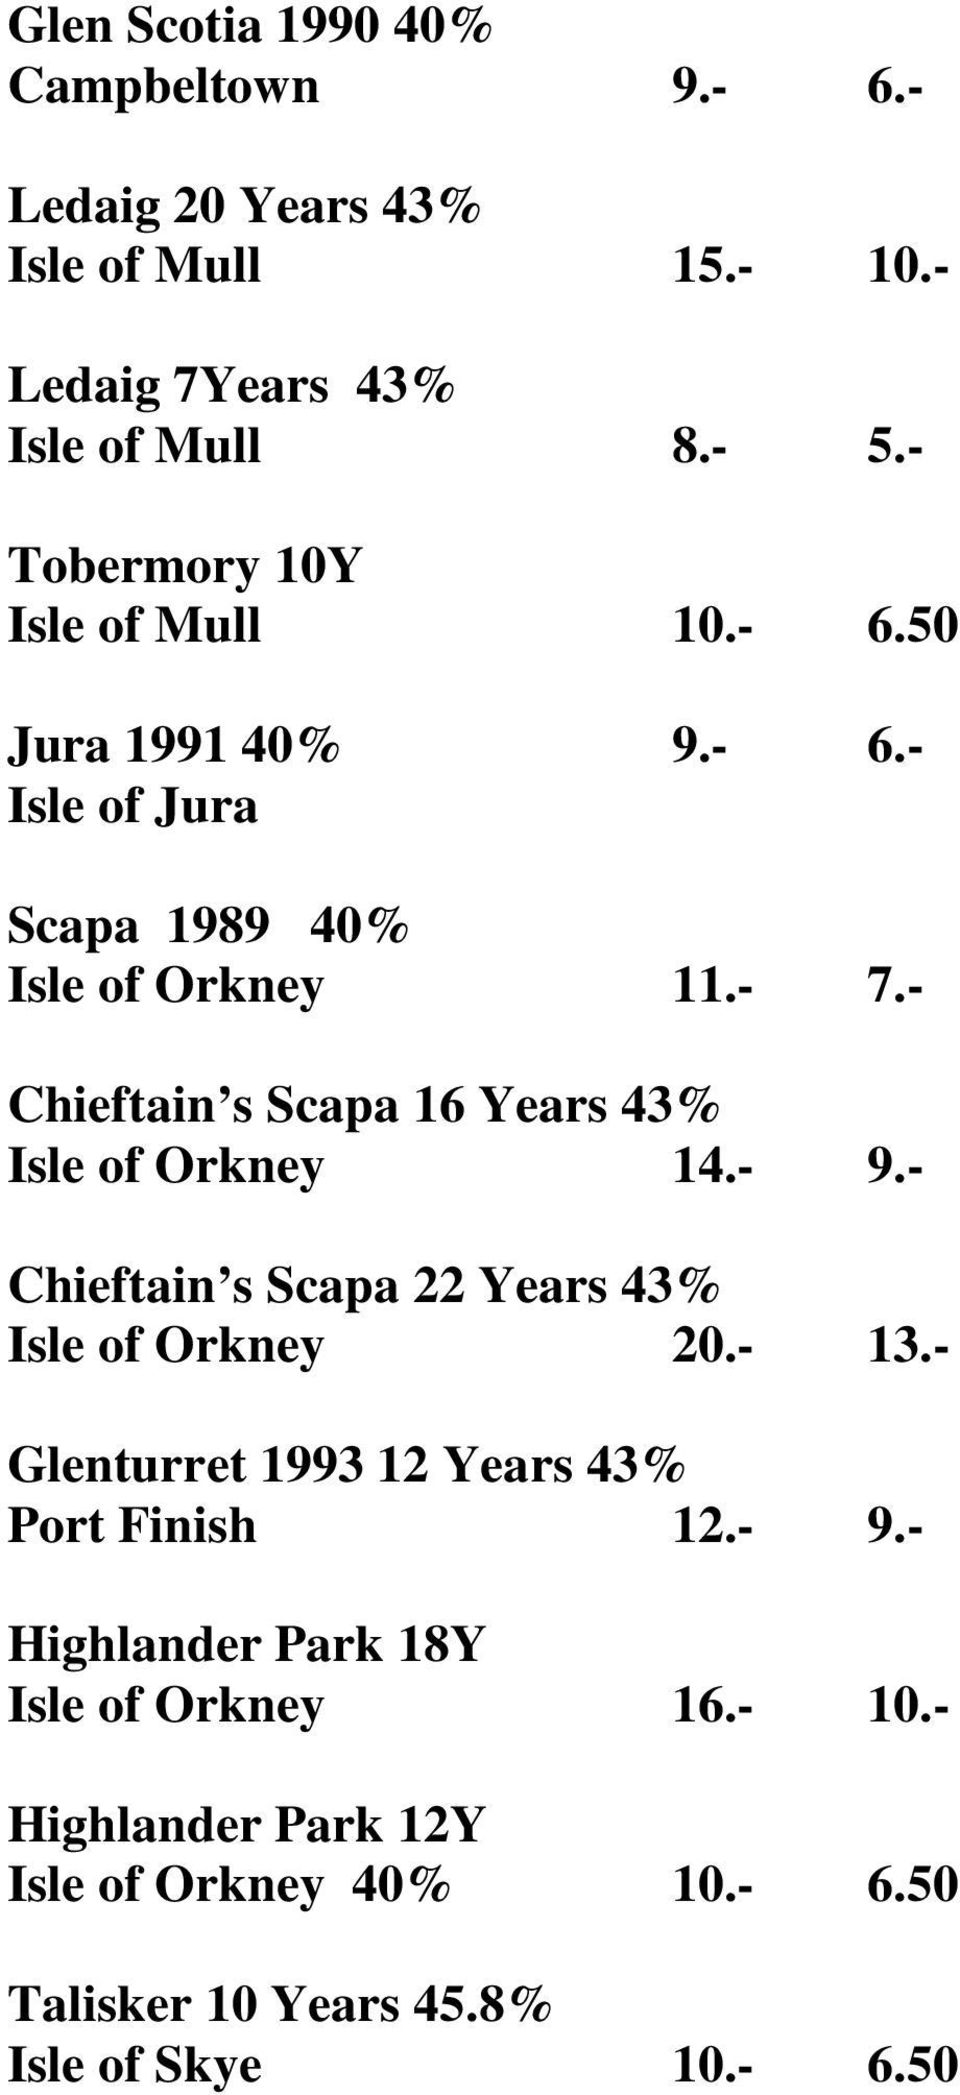 - Chieftain s Scapa 16 Years 43% Isle of Orkney 14.- 9.- Chieftain s Scapa 22 Years 43% Isle of Orkney 20.- 13.